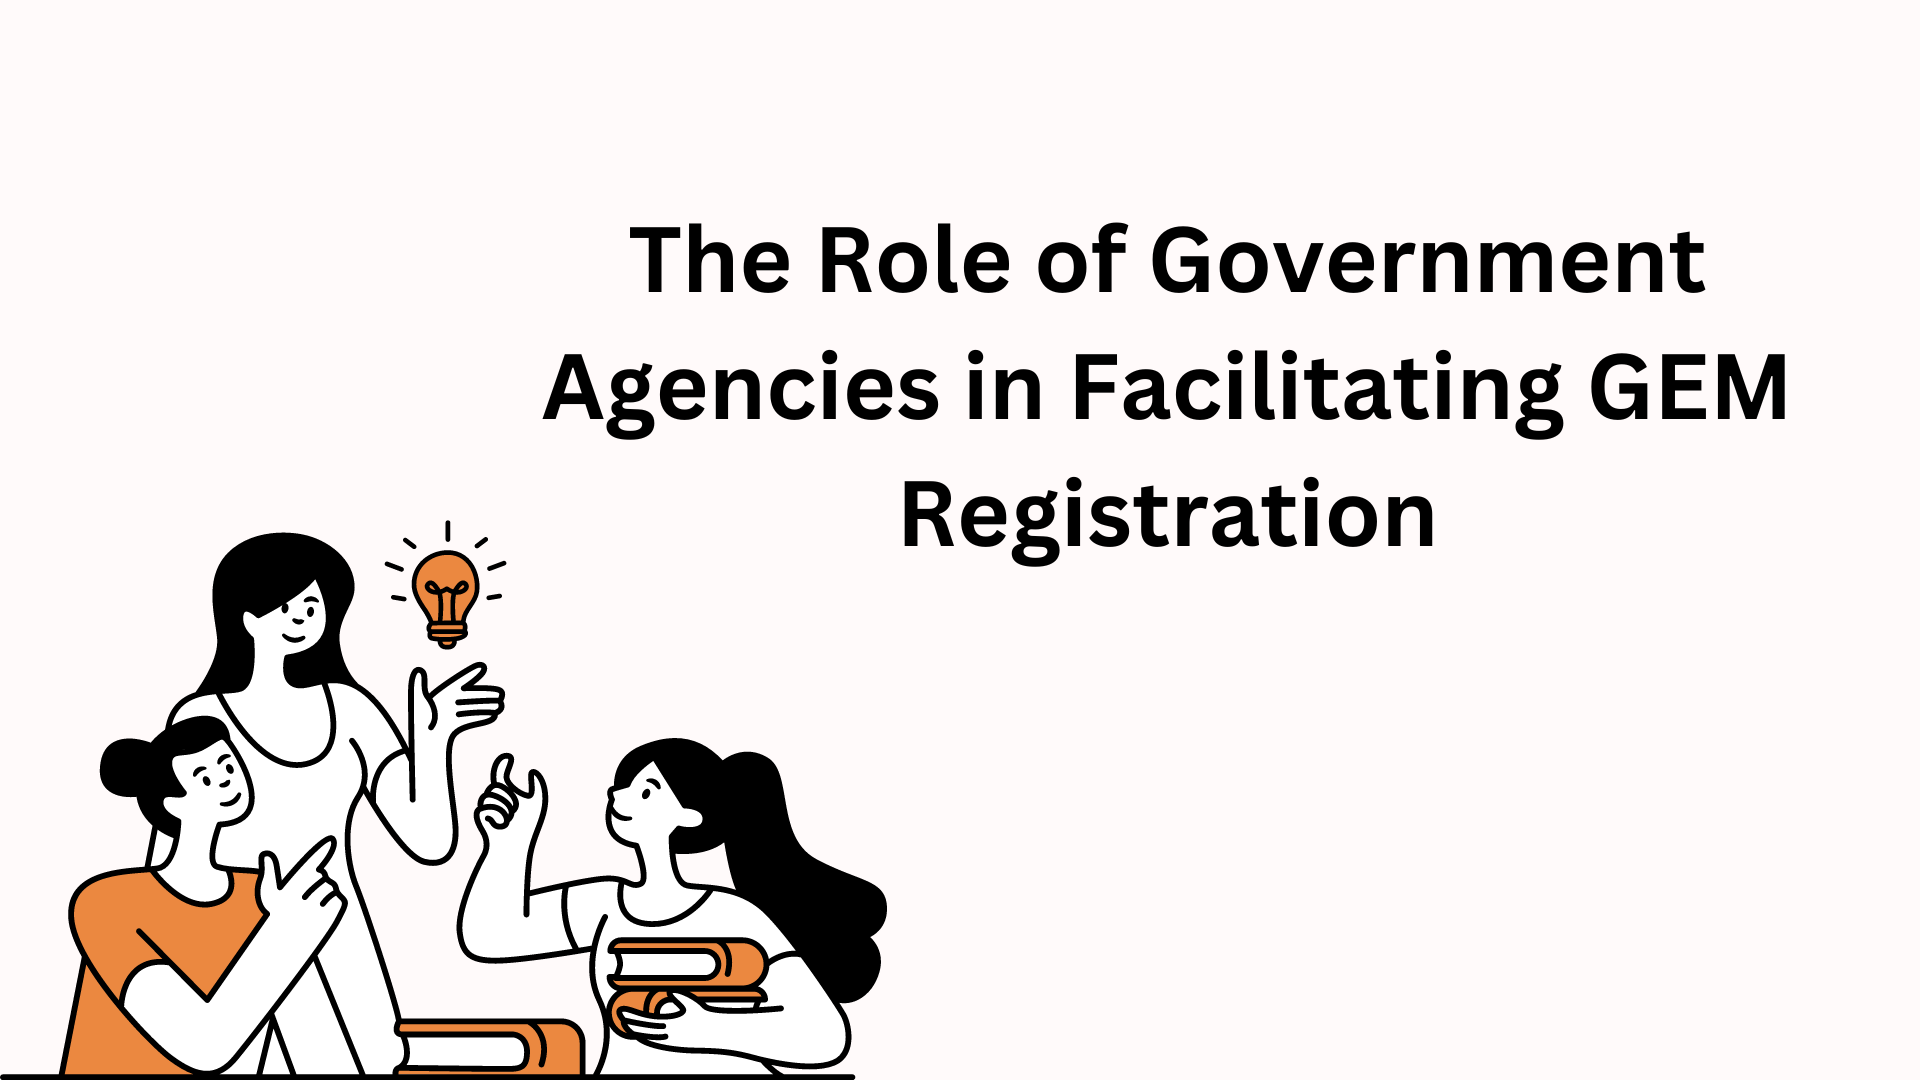 The Role of Government Agencies in Facilitating GEM Registration